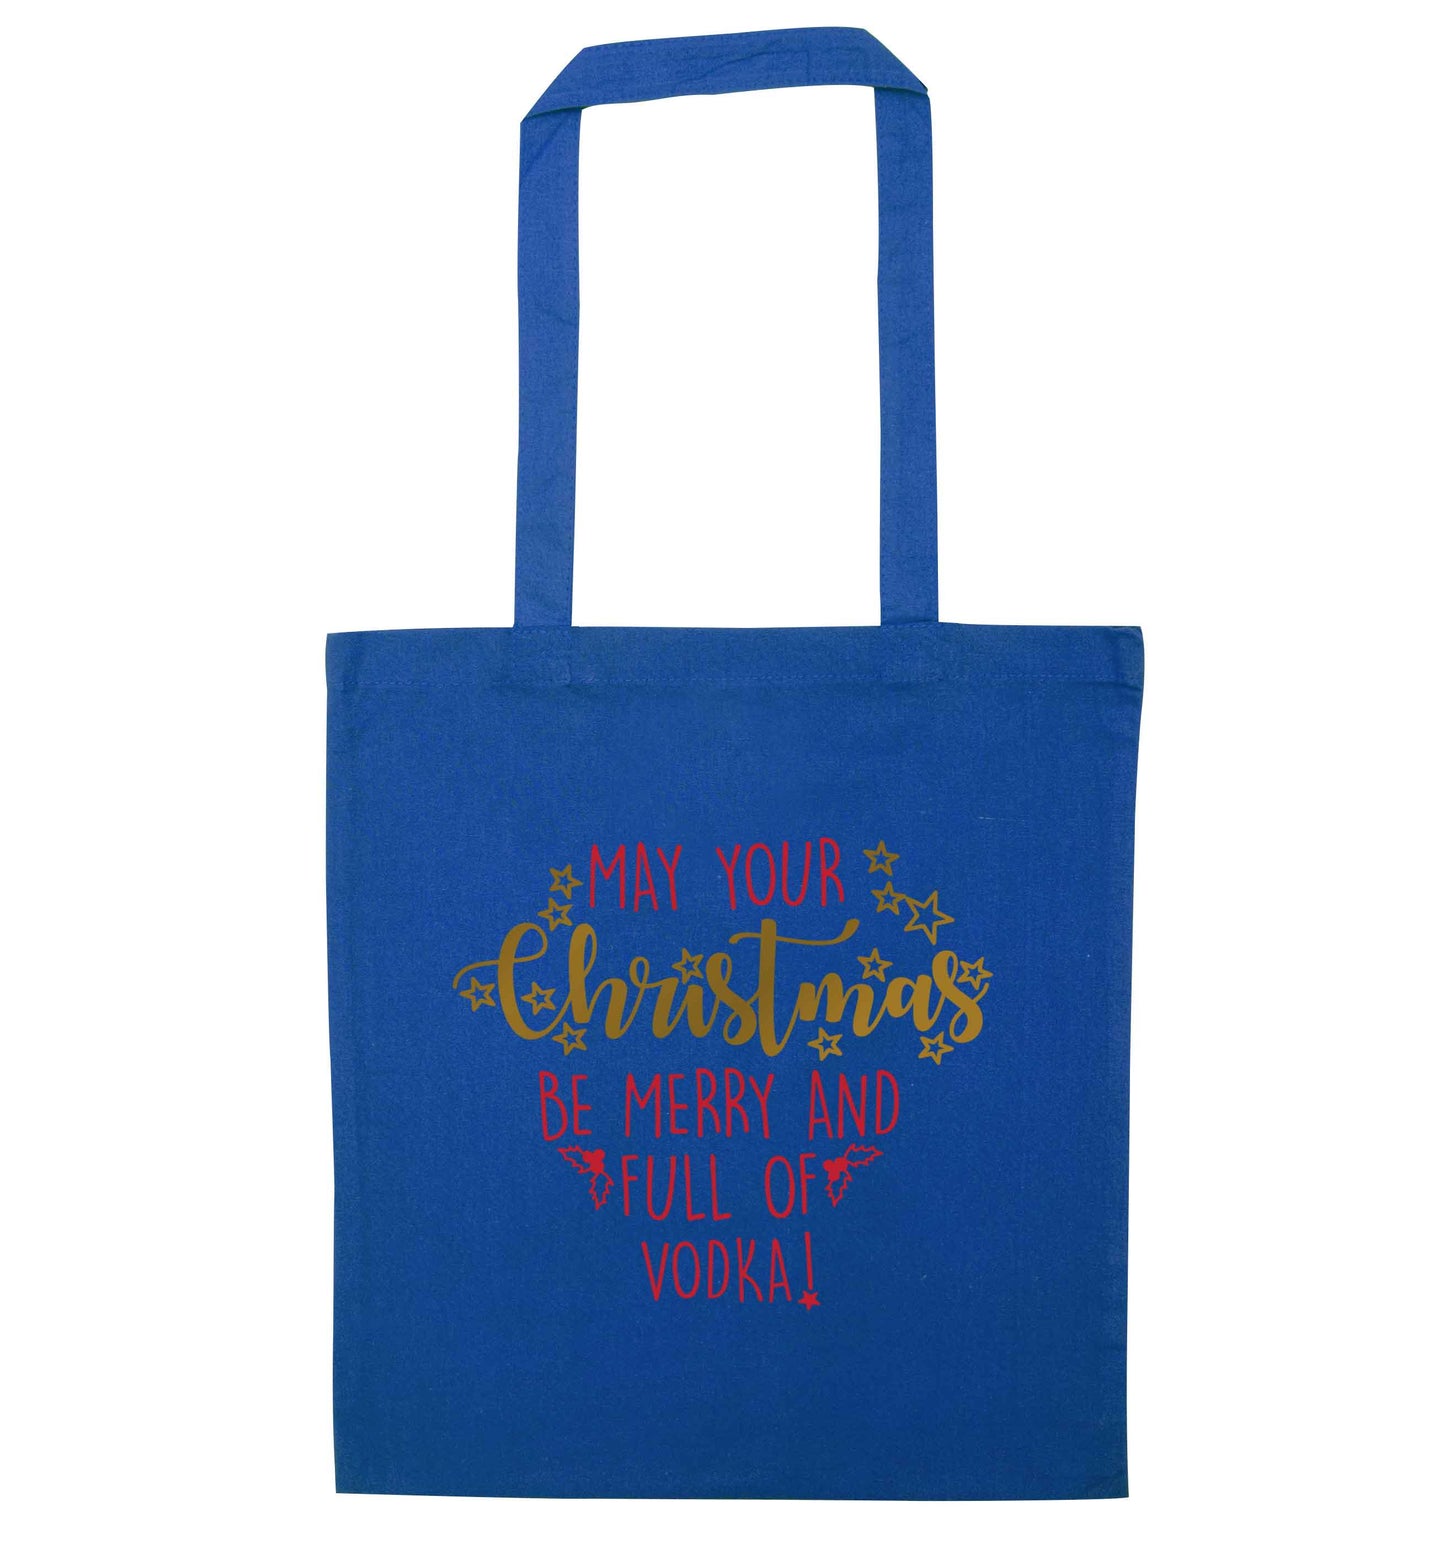 May your Christmas be merry and full of vodka blue tote bag